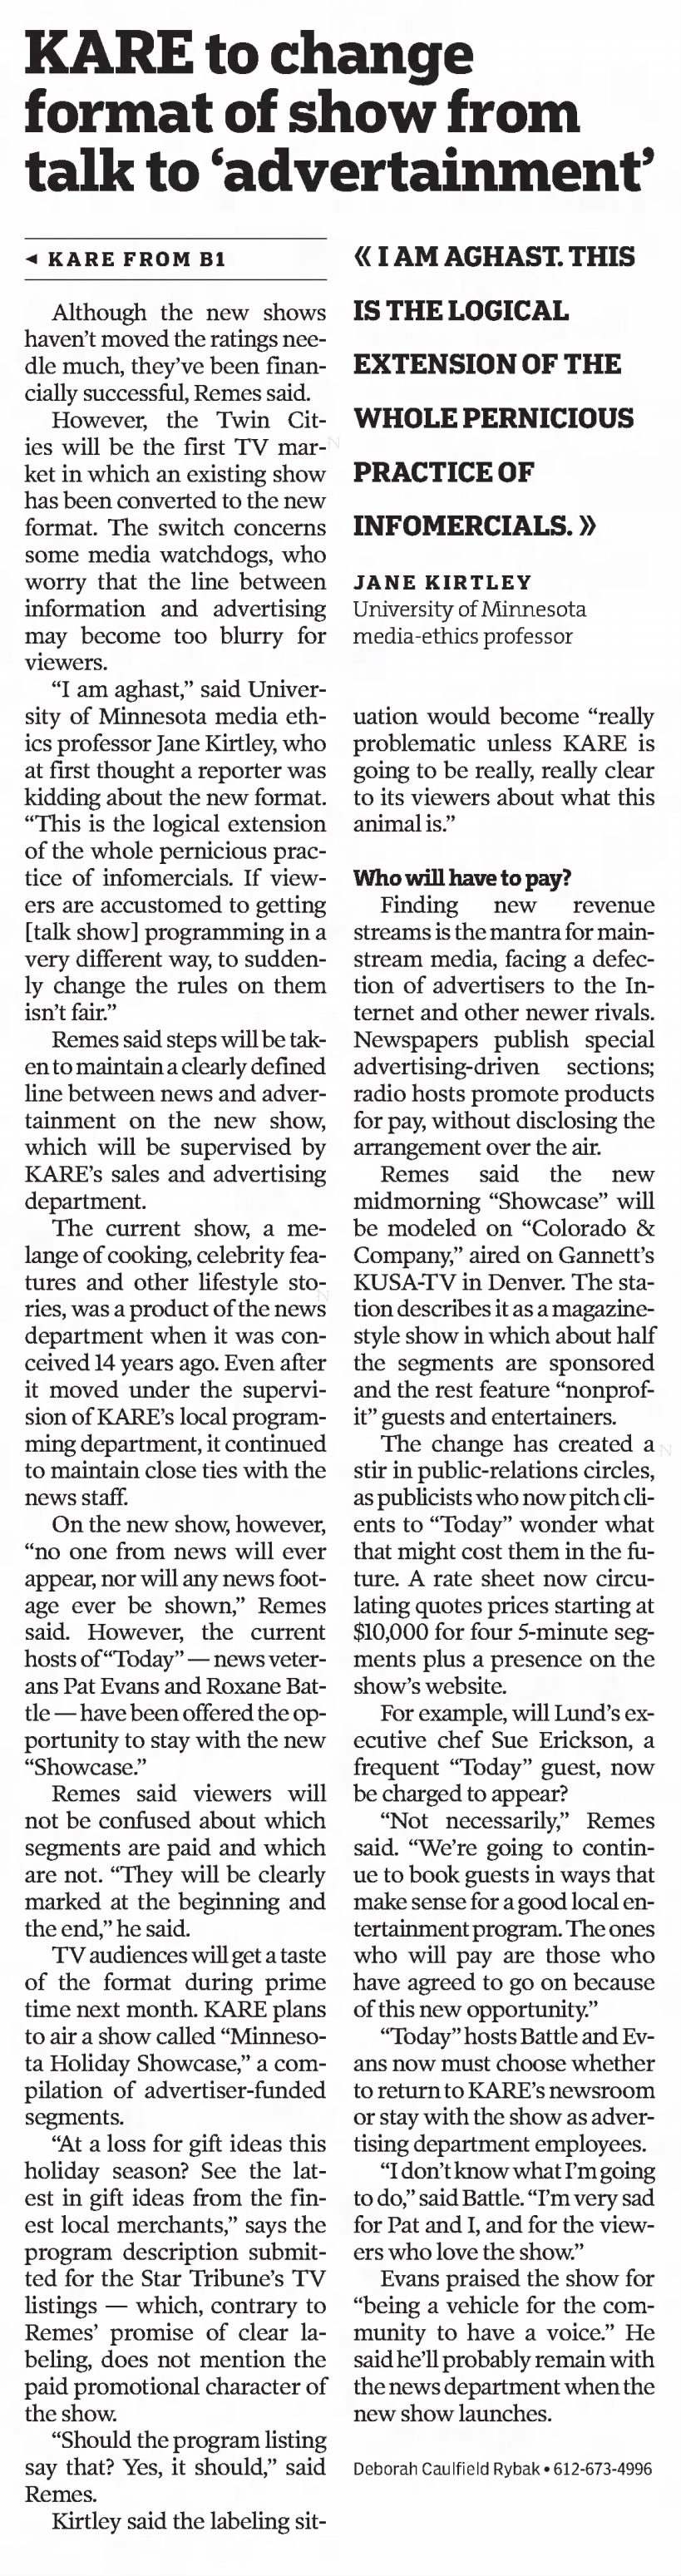 KARE to change format of show from talk to 'advertainment'